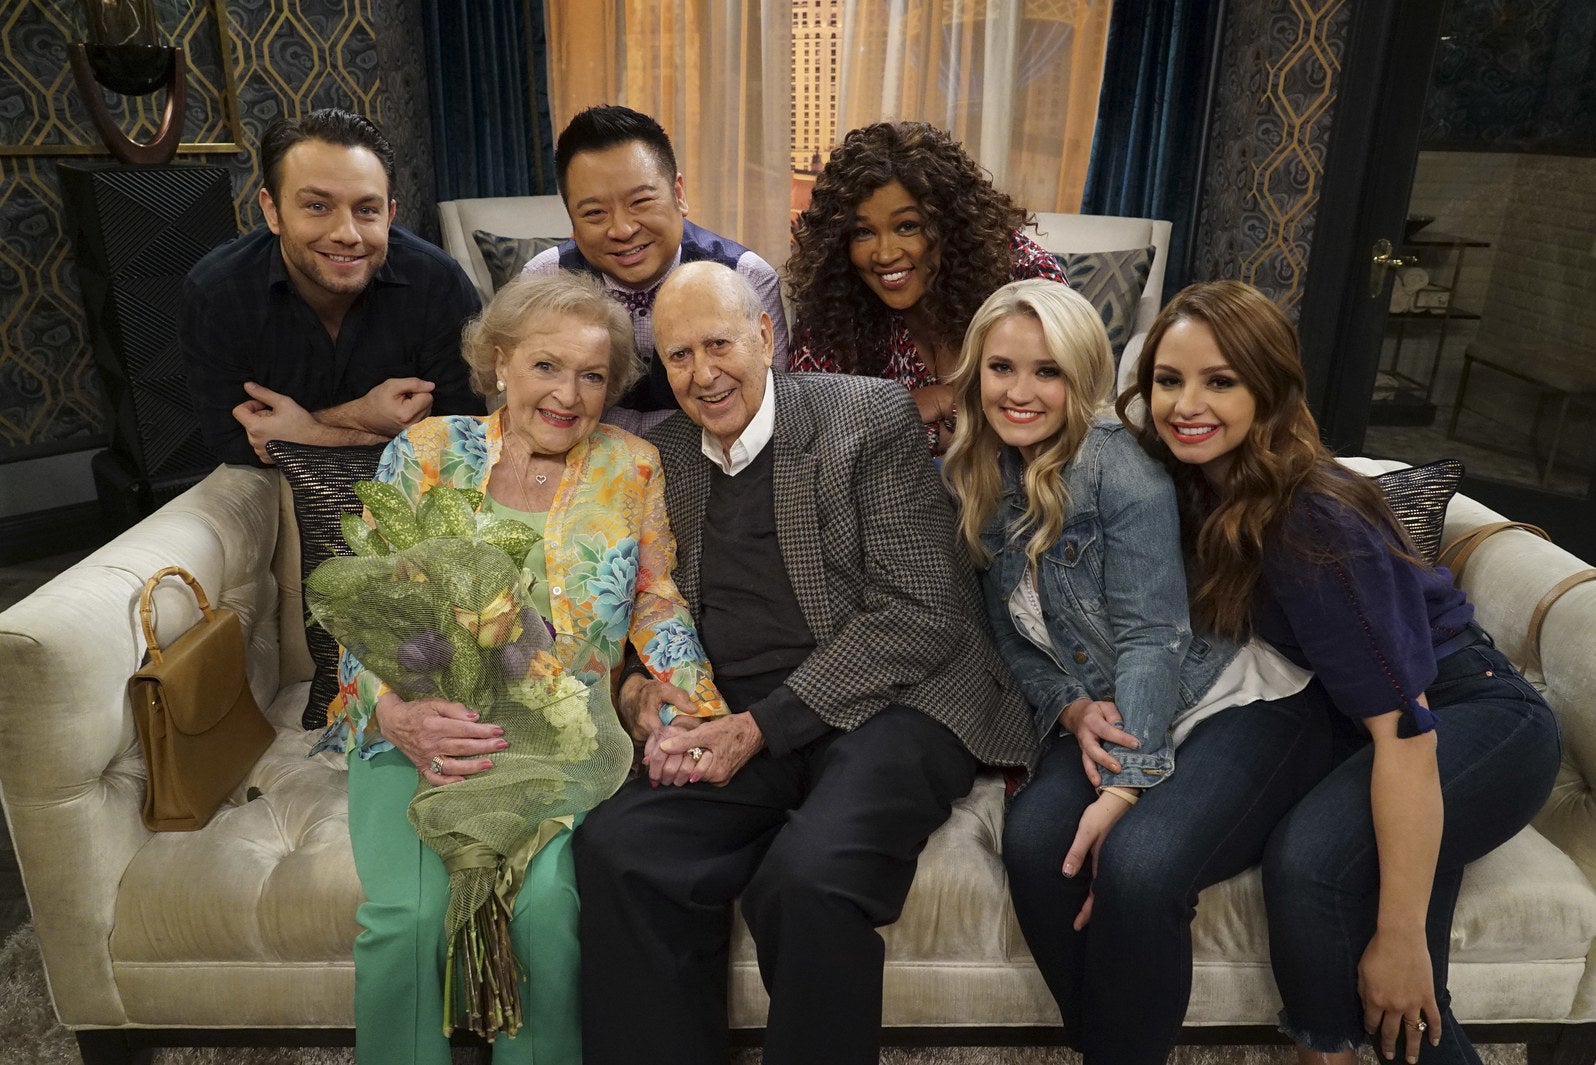 The cast, including smiling Betty holding a bouquet of flowers, at a couch